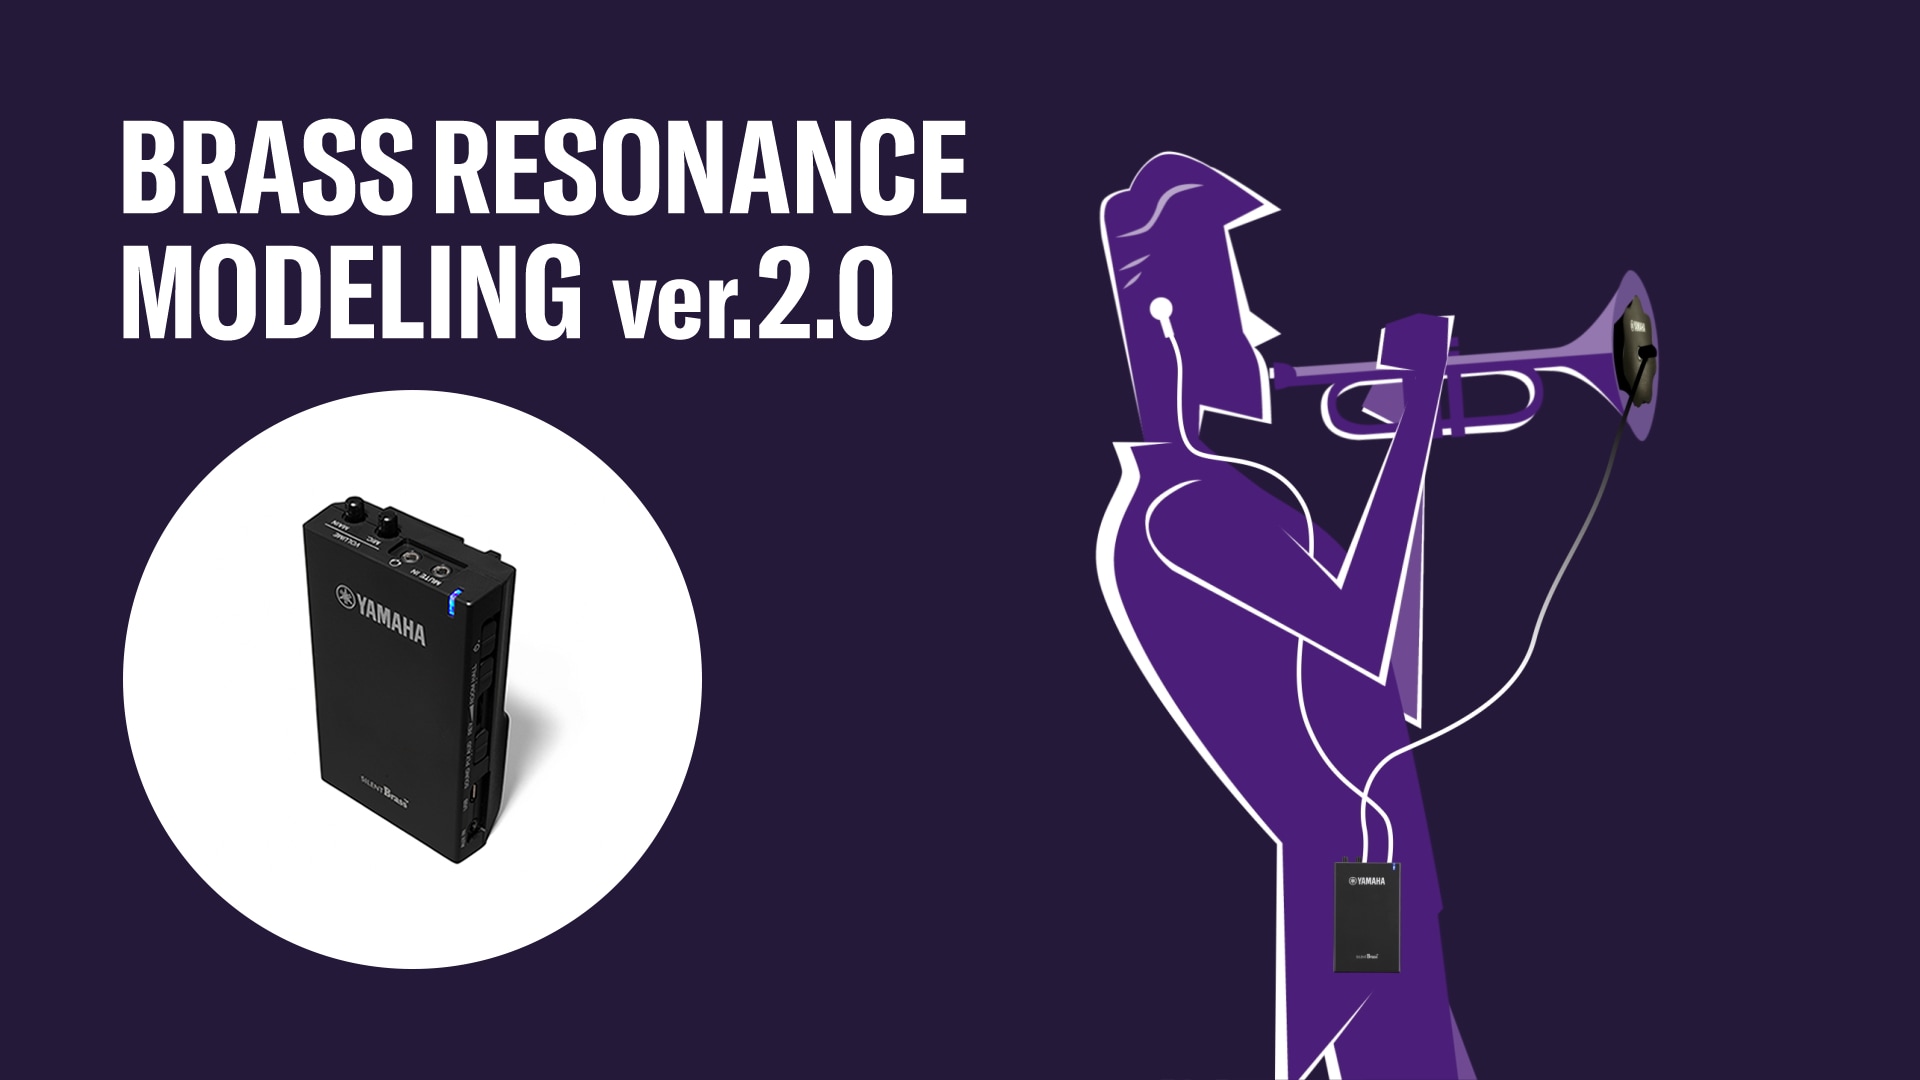 Feature image showing More Natural Sound - Brass Resonance Modeling ver.2.0